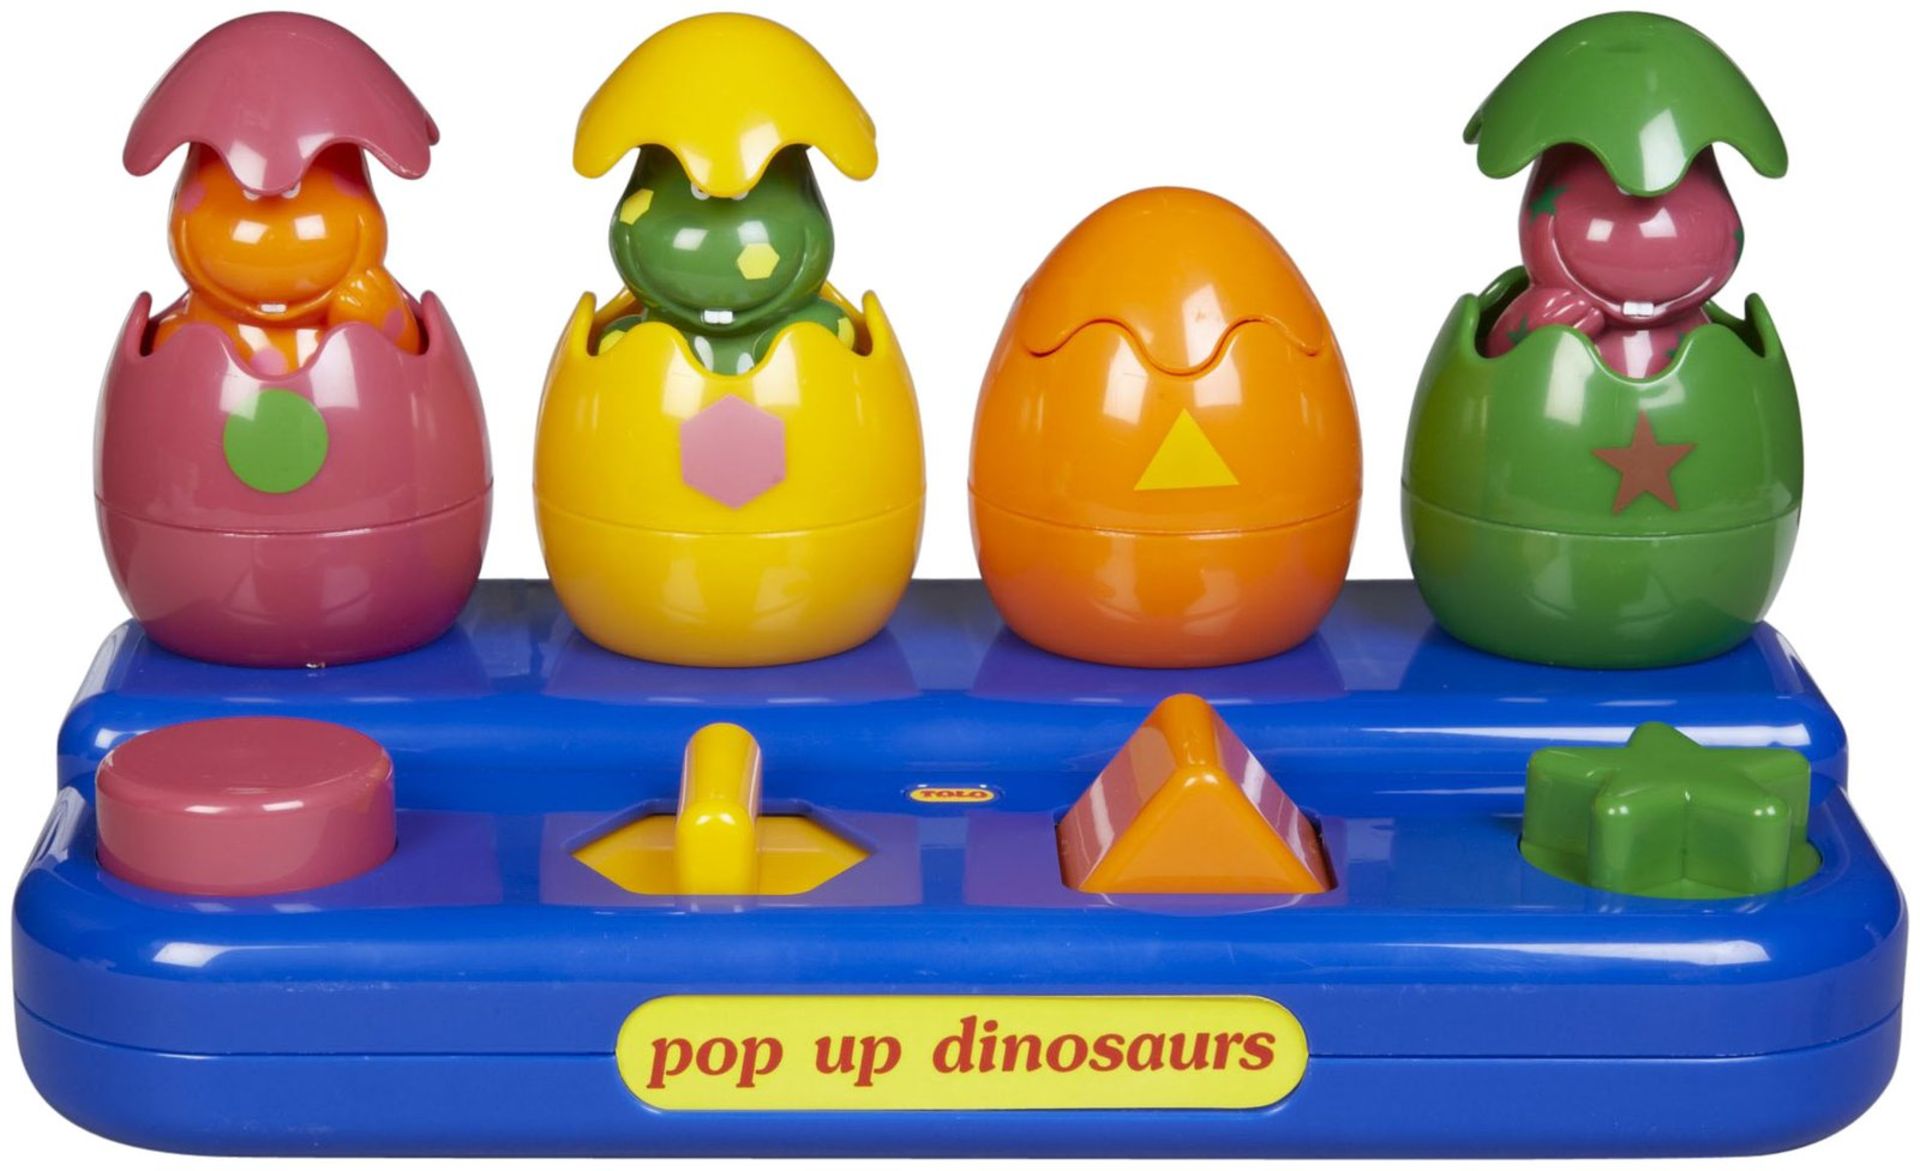 V Brand New Tolo TN89200 Four Pop Up Dinosaurs Age 12mths + ISP £26.95 (Amazon)